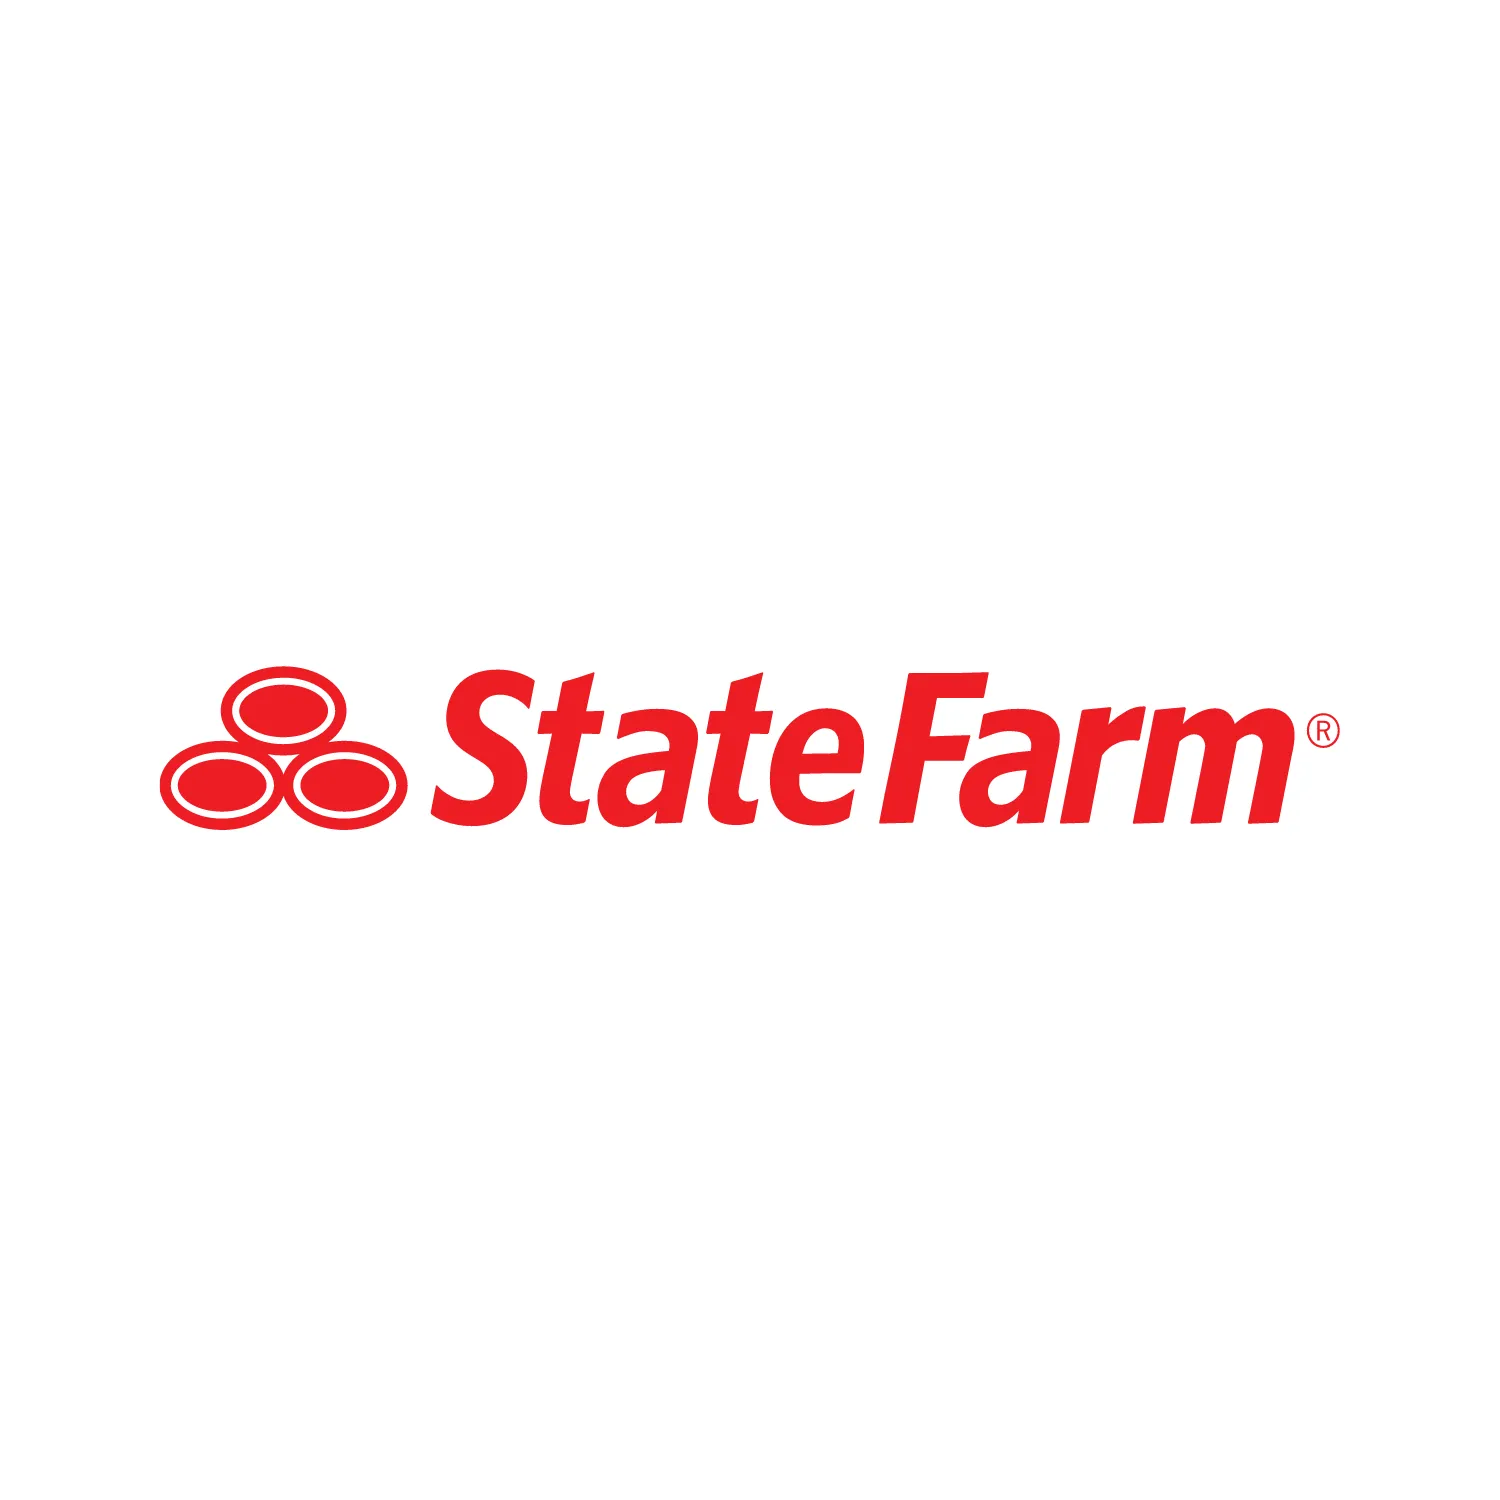 Database of State Farm Locations in the United States